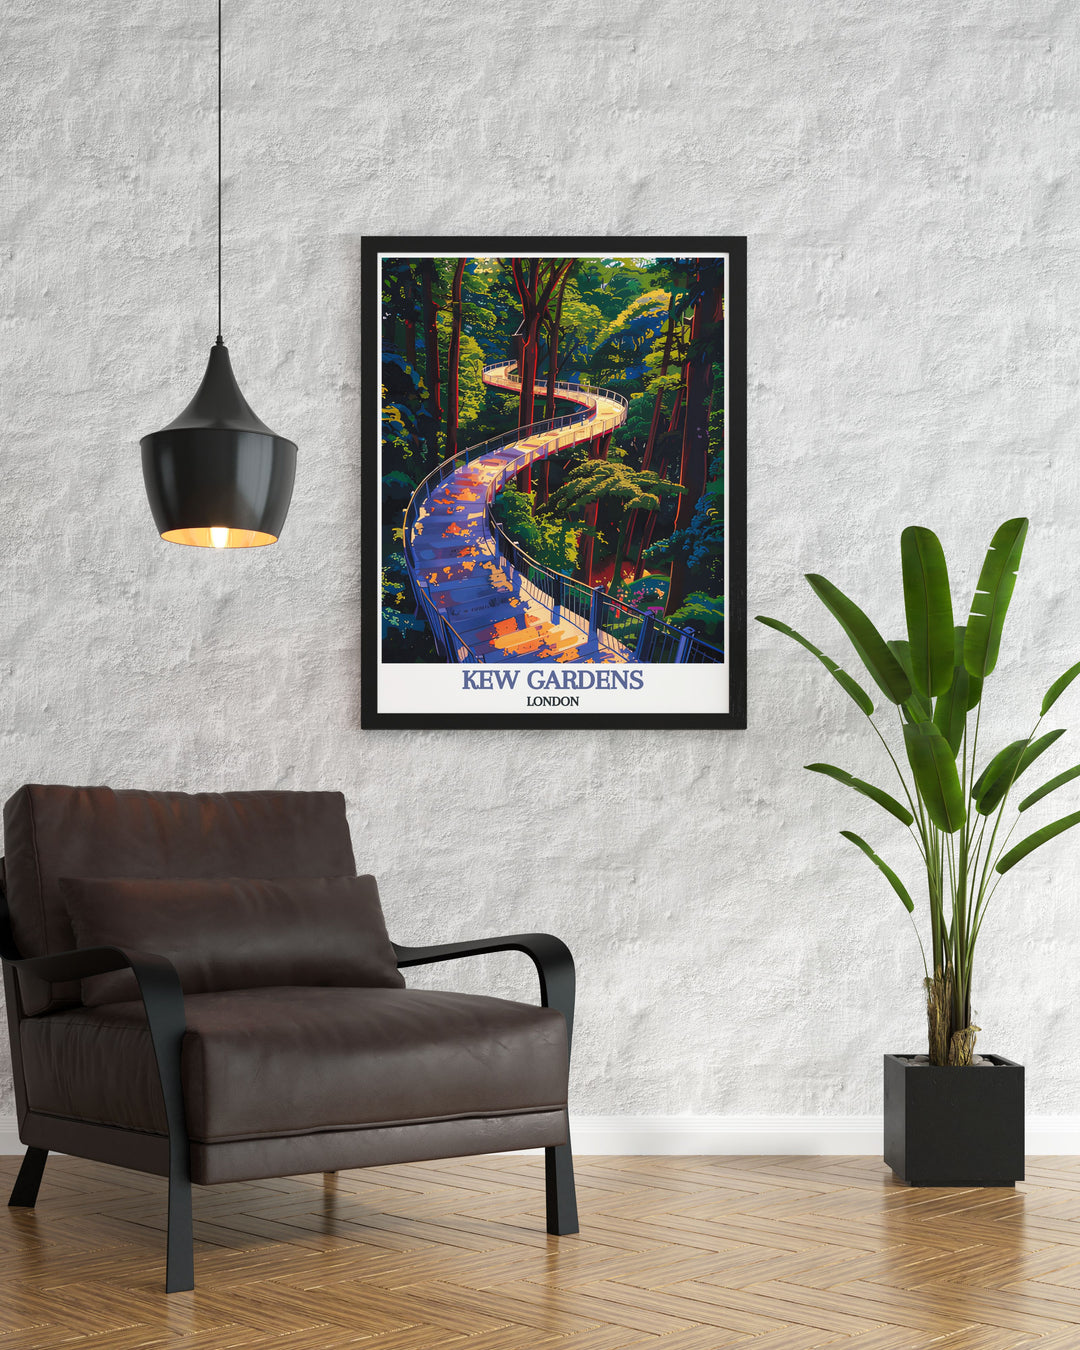 The dynamic energy of the Treetop Walkway, known for its exhilarating views and innovative design, is highlighted in this travel poster. Ideal for urban enthusiasts and nature lovers, this piece captures the lively spirit of Kew Gardens.